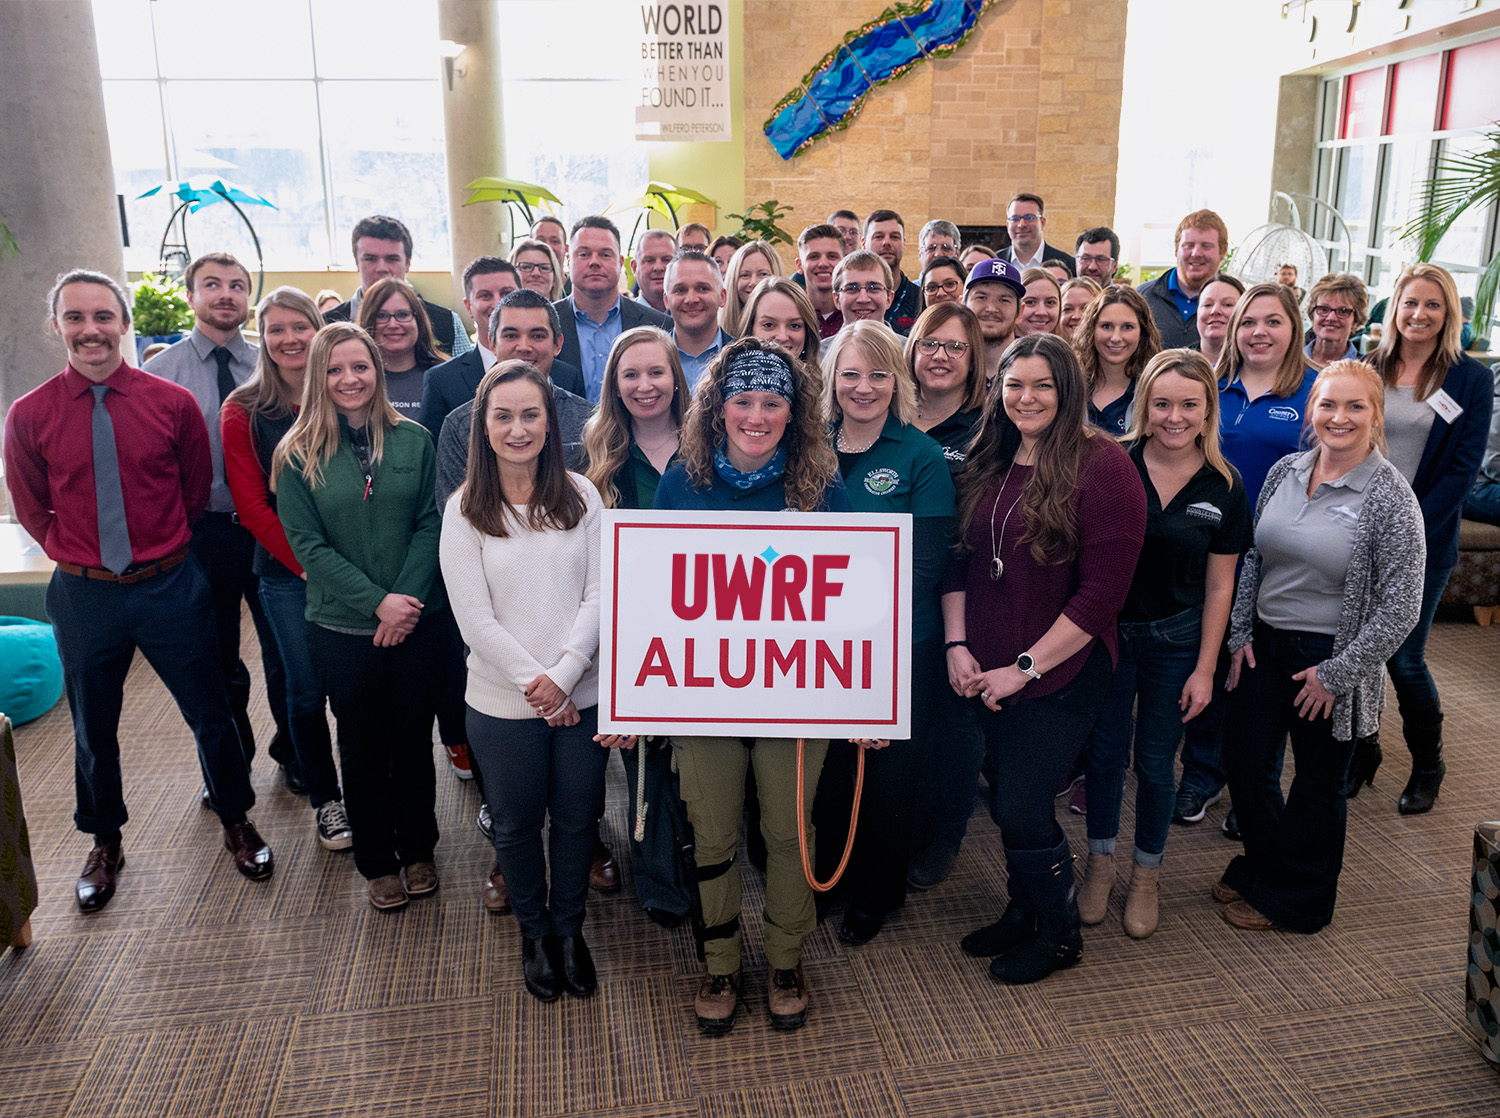 A group of UWRF alumni gather in the University Center